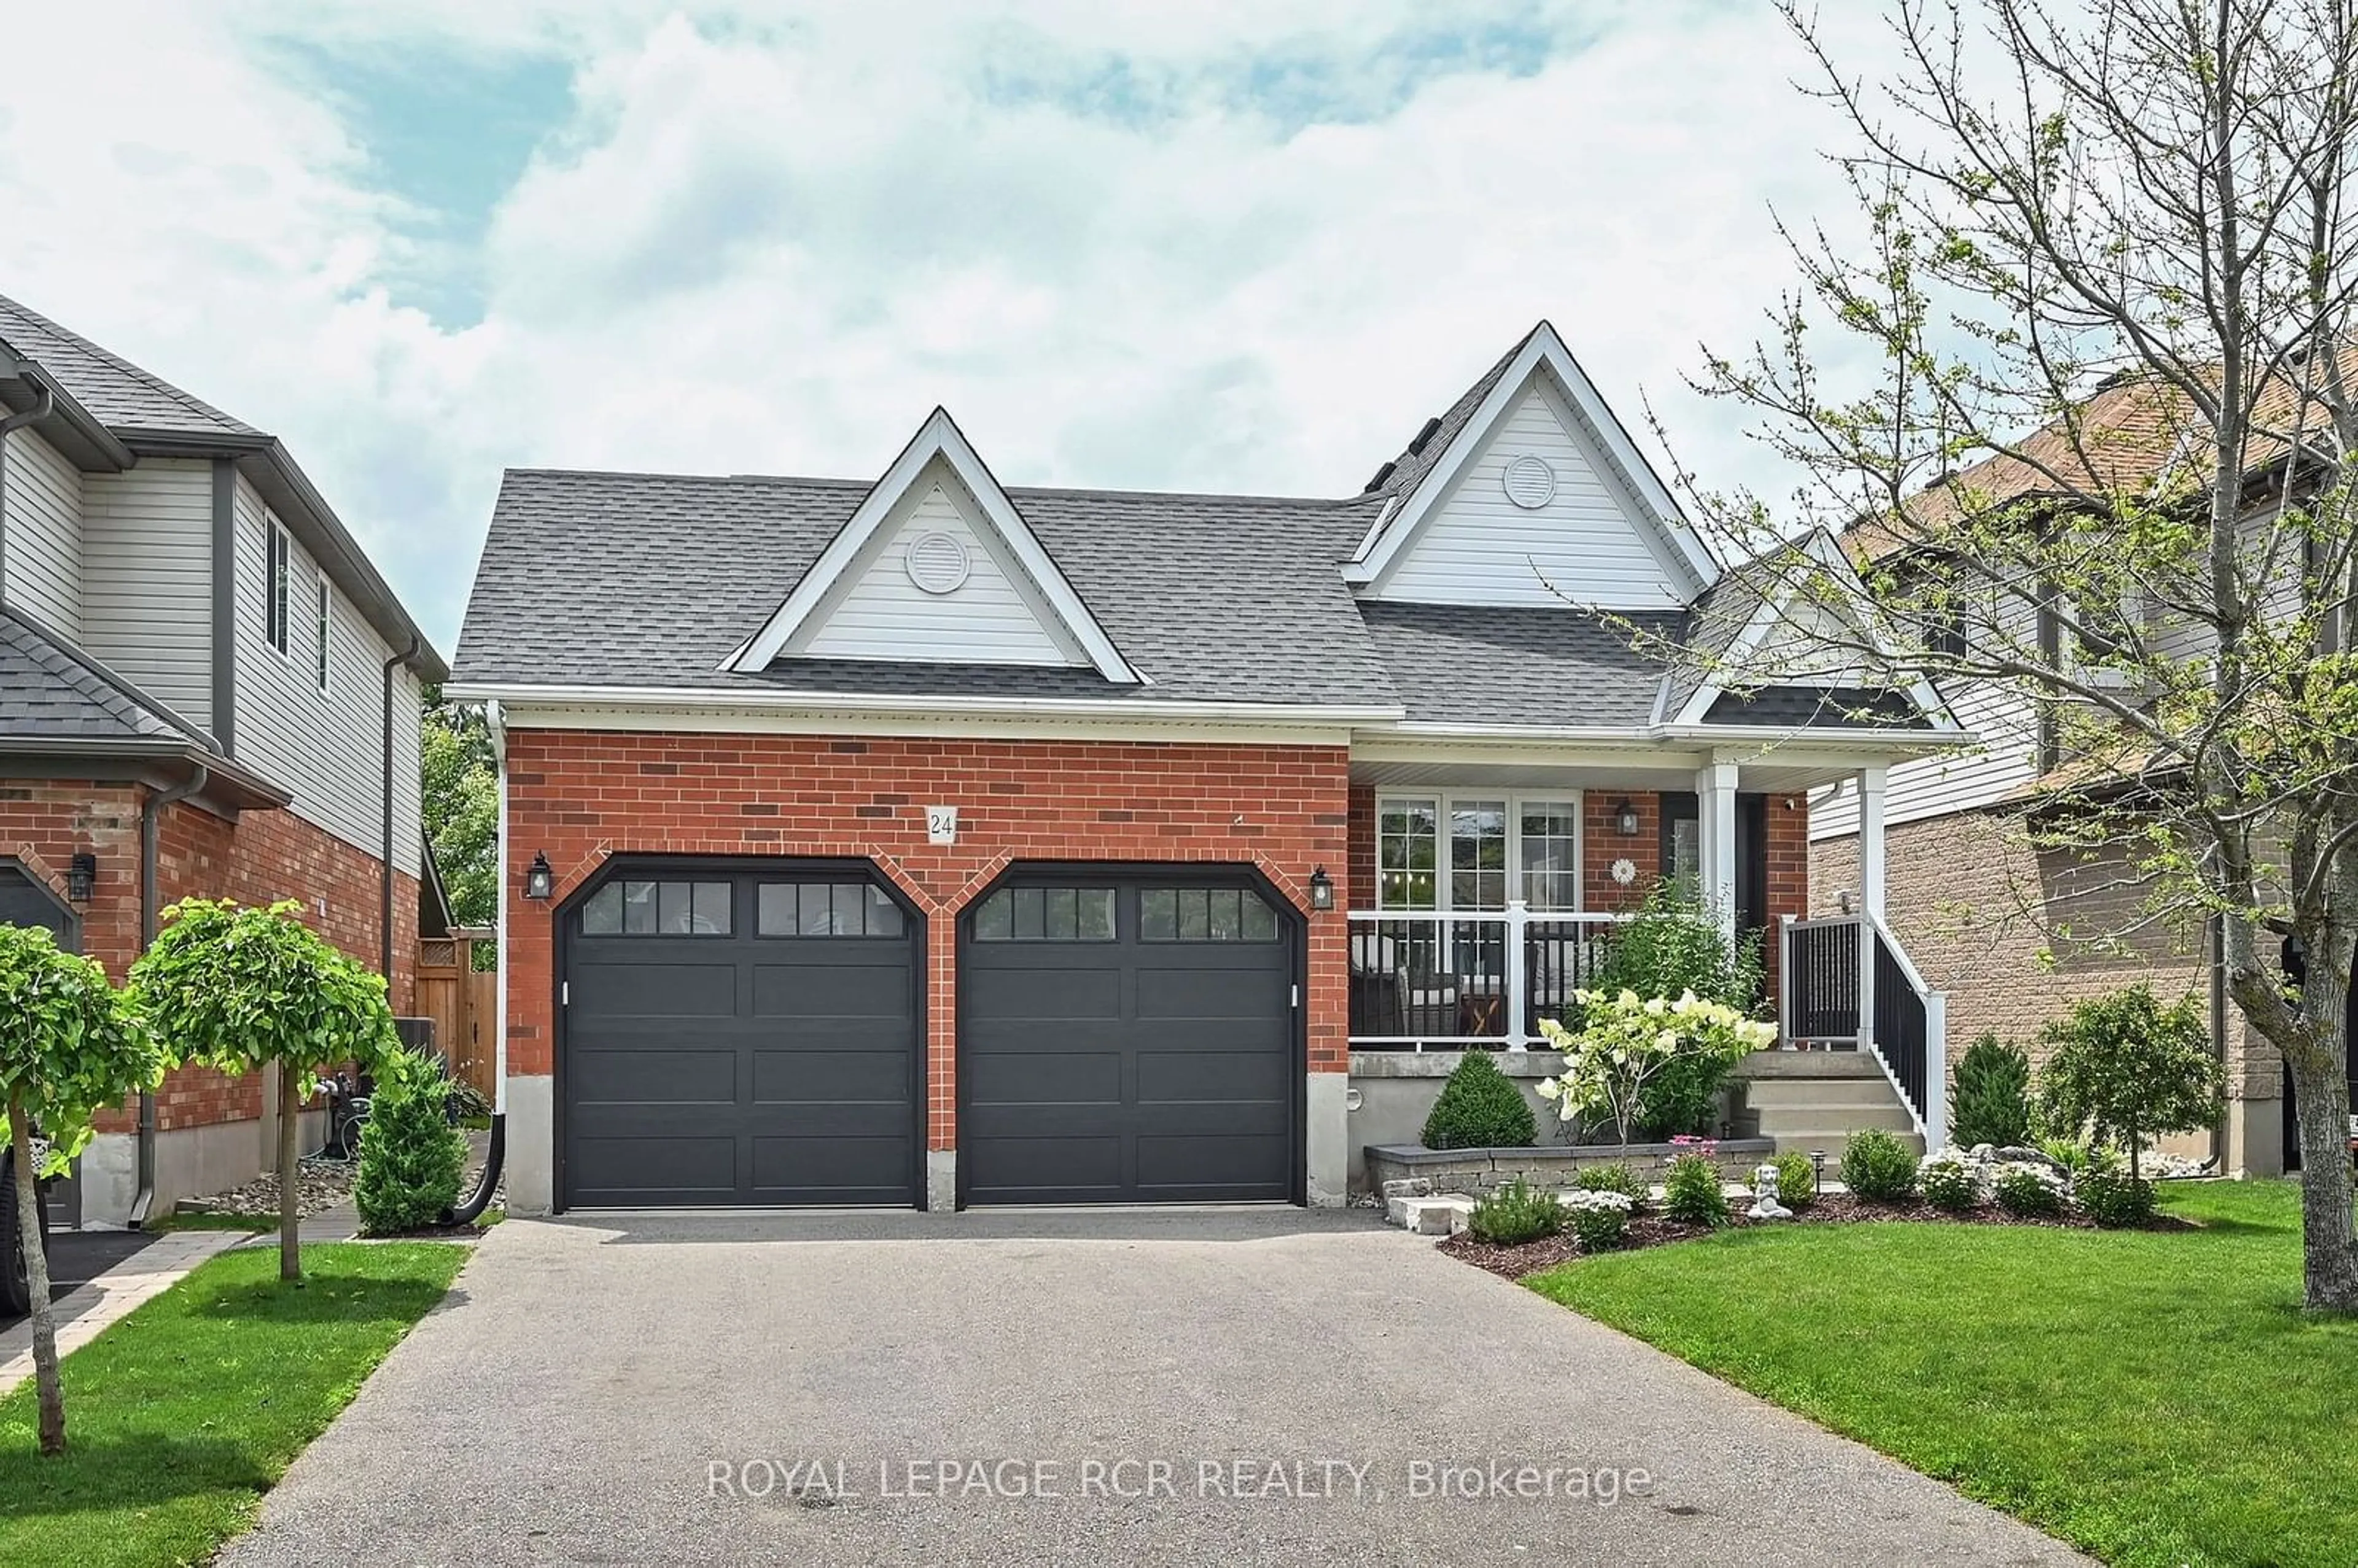 Home with brick exterior material for 24 Glengarry Rd, Orangeville Ontario L9W 5A4